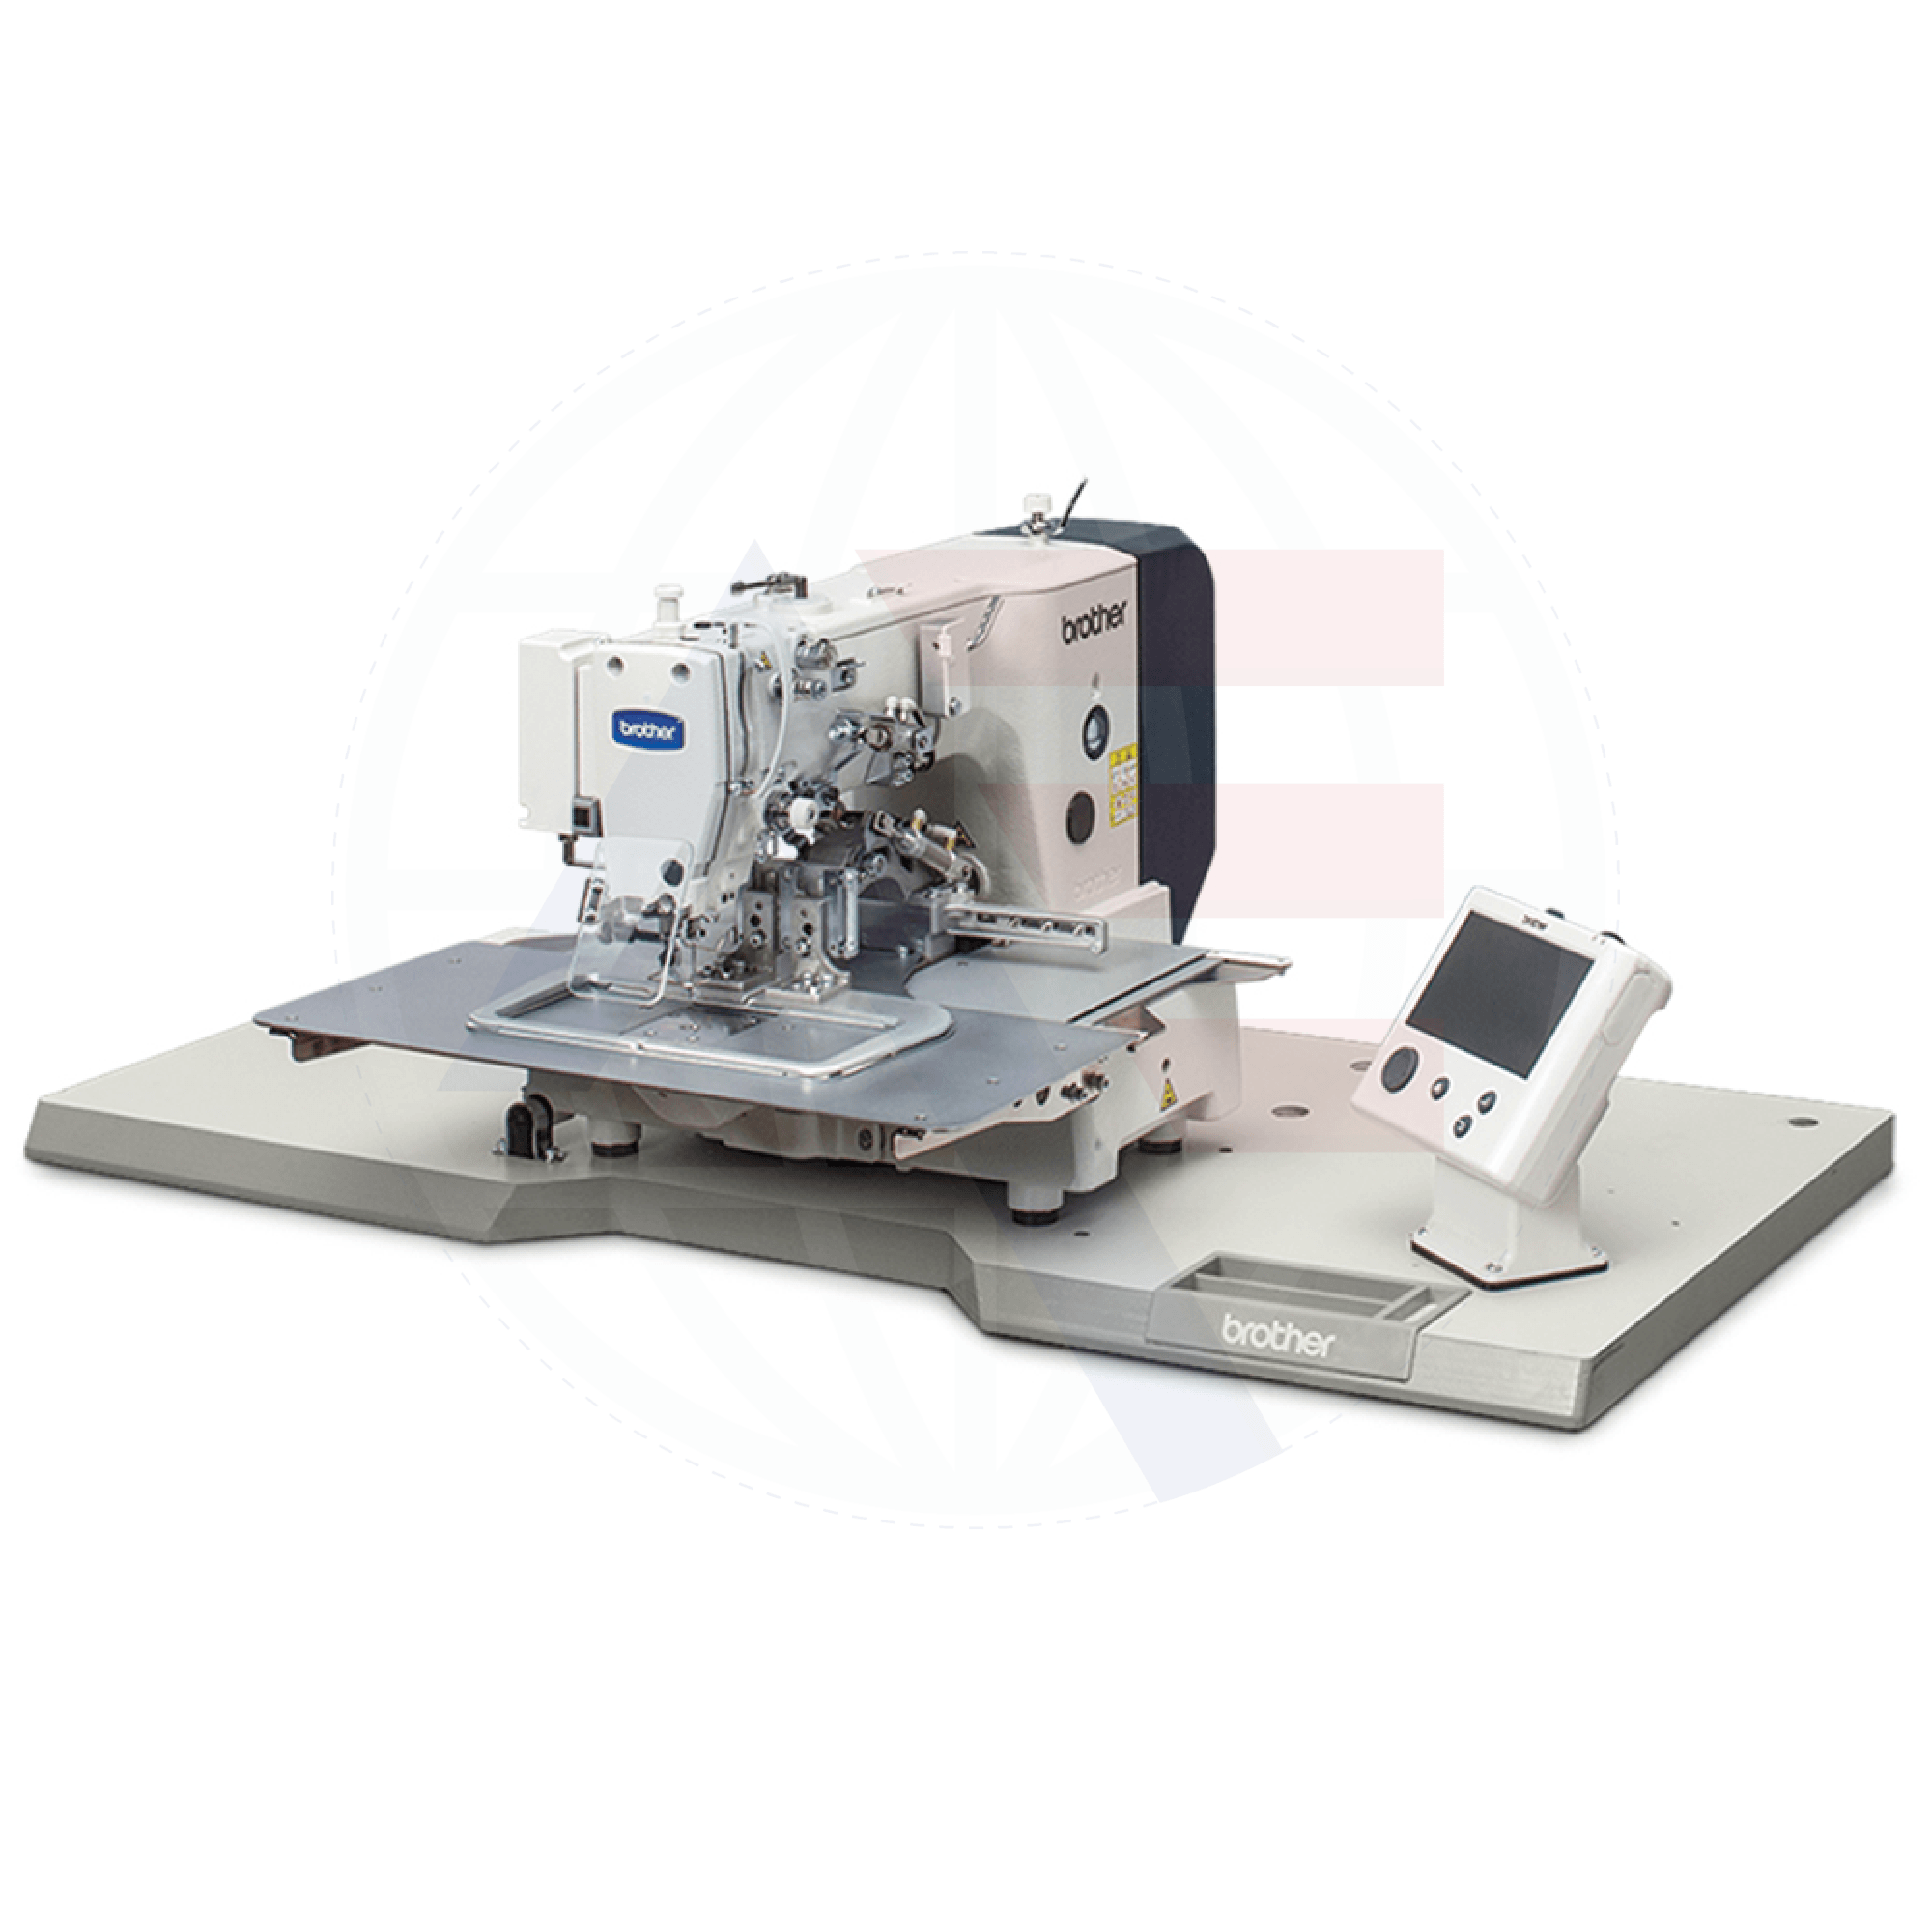 Brother Bas-326H-484 Pattern Sewer Machine Sewing Machines